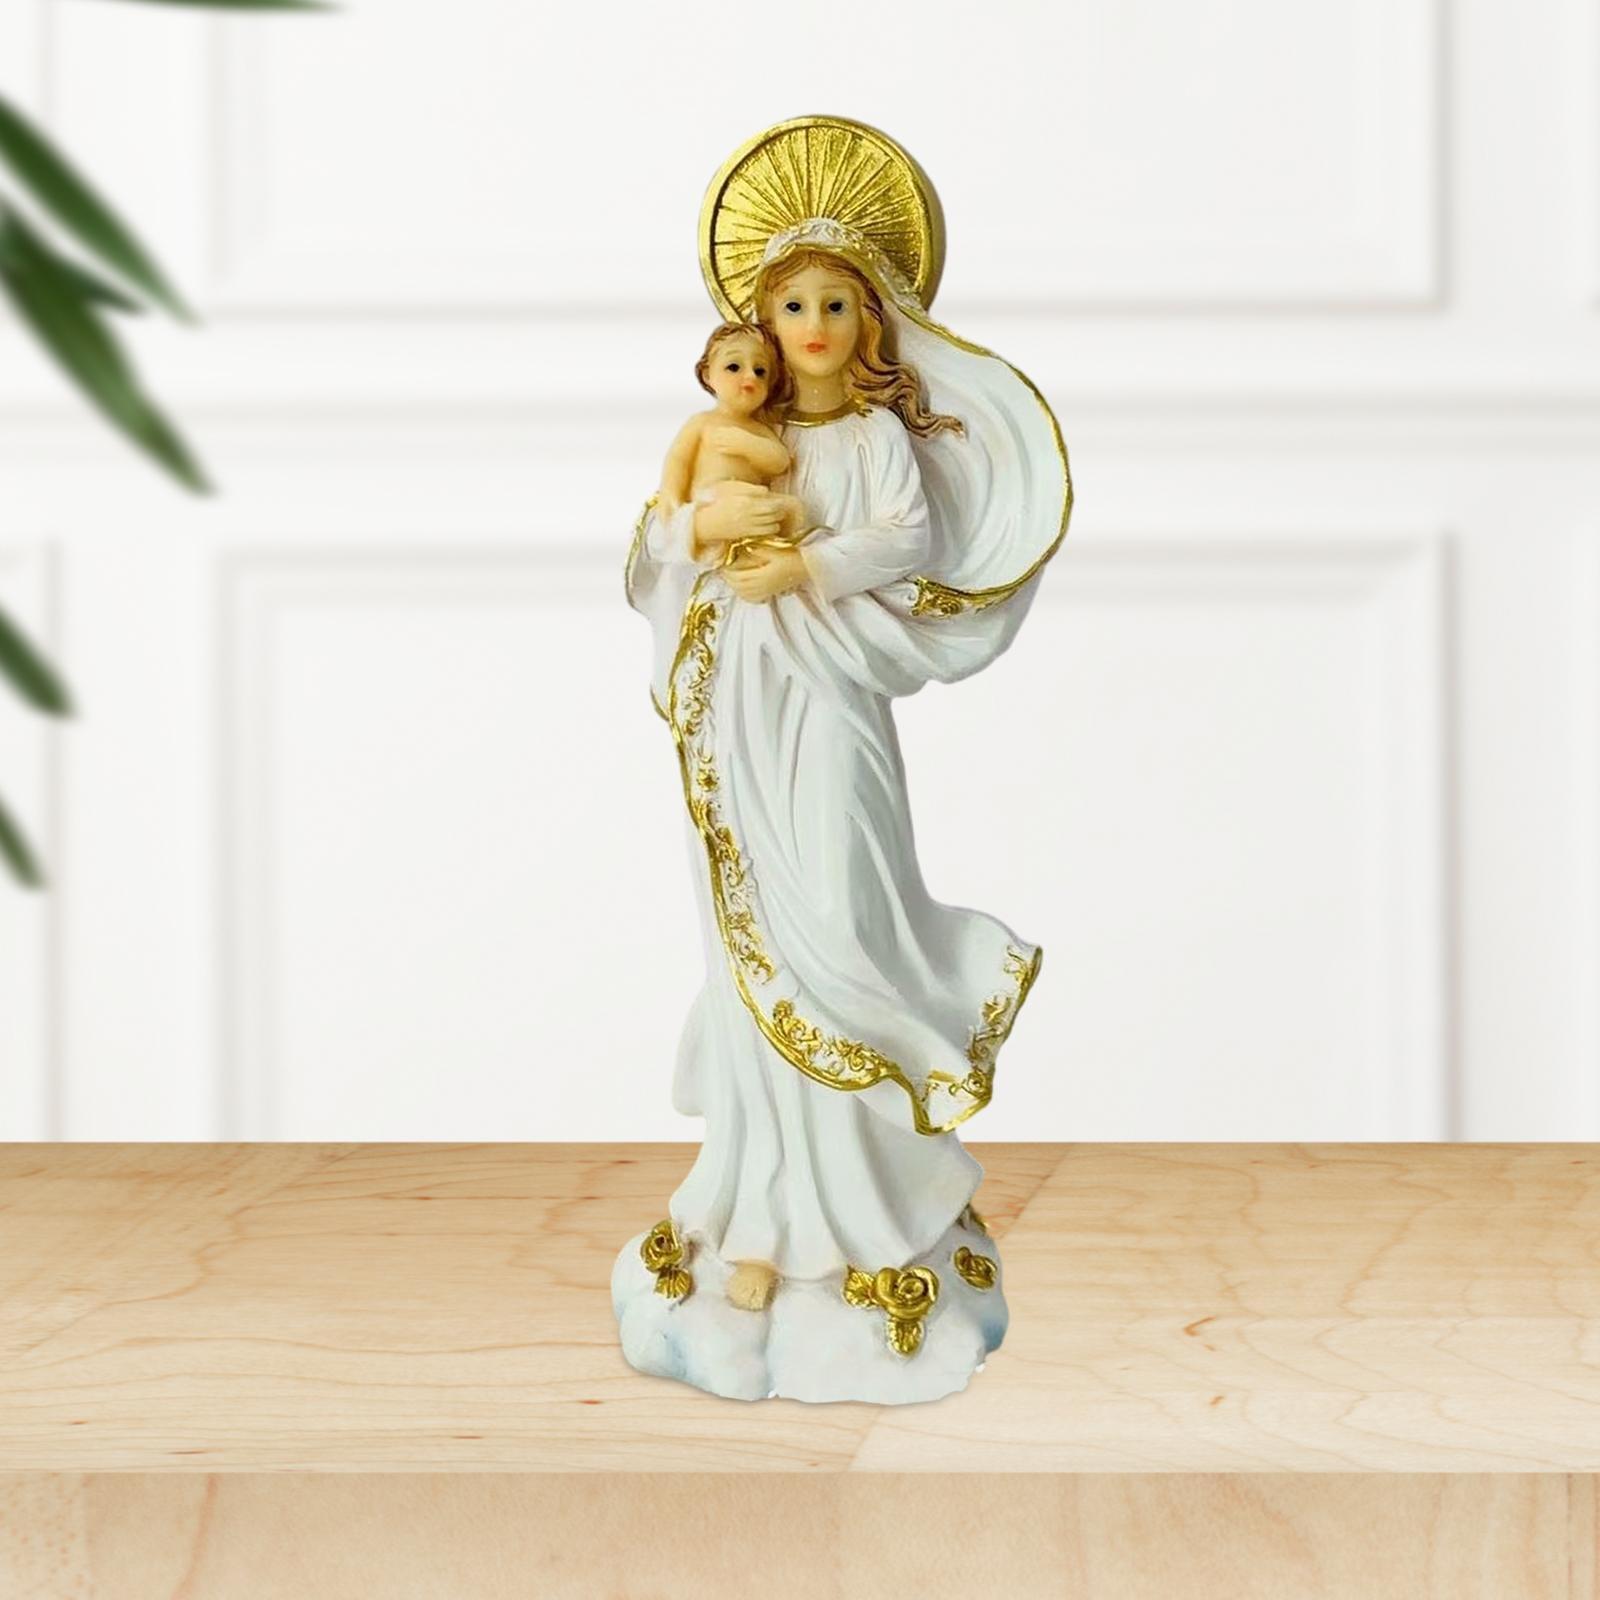 Blessed Mother and Child Jesus Figurine Crafts for Home Tabletop Living Room